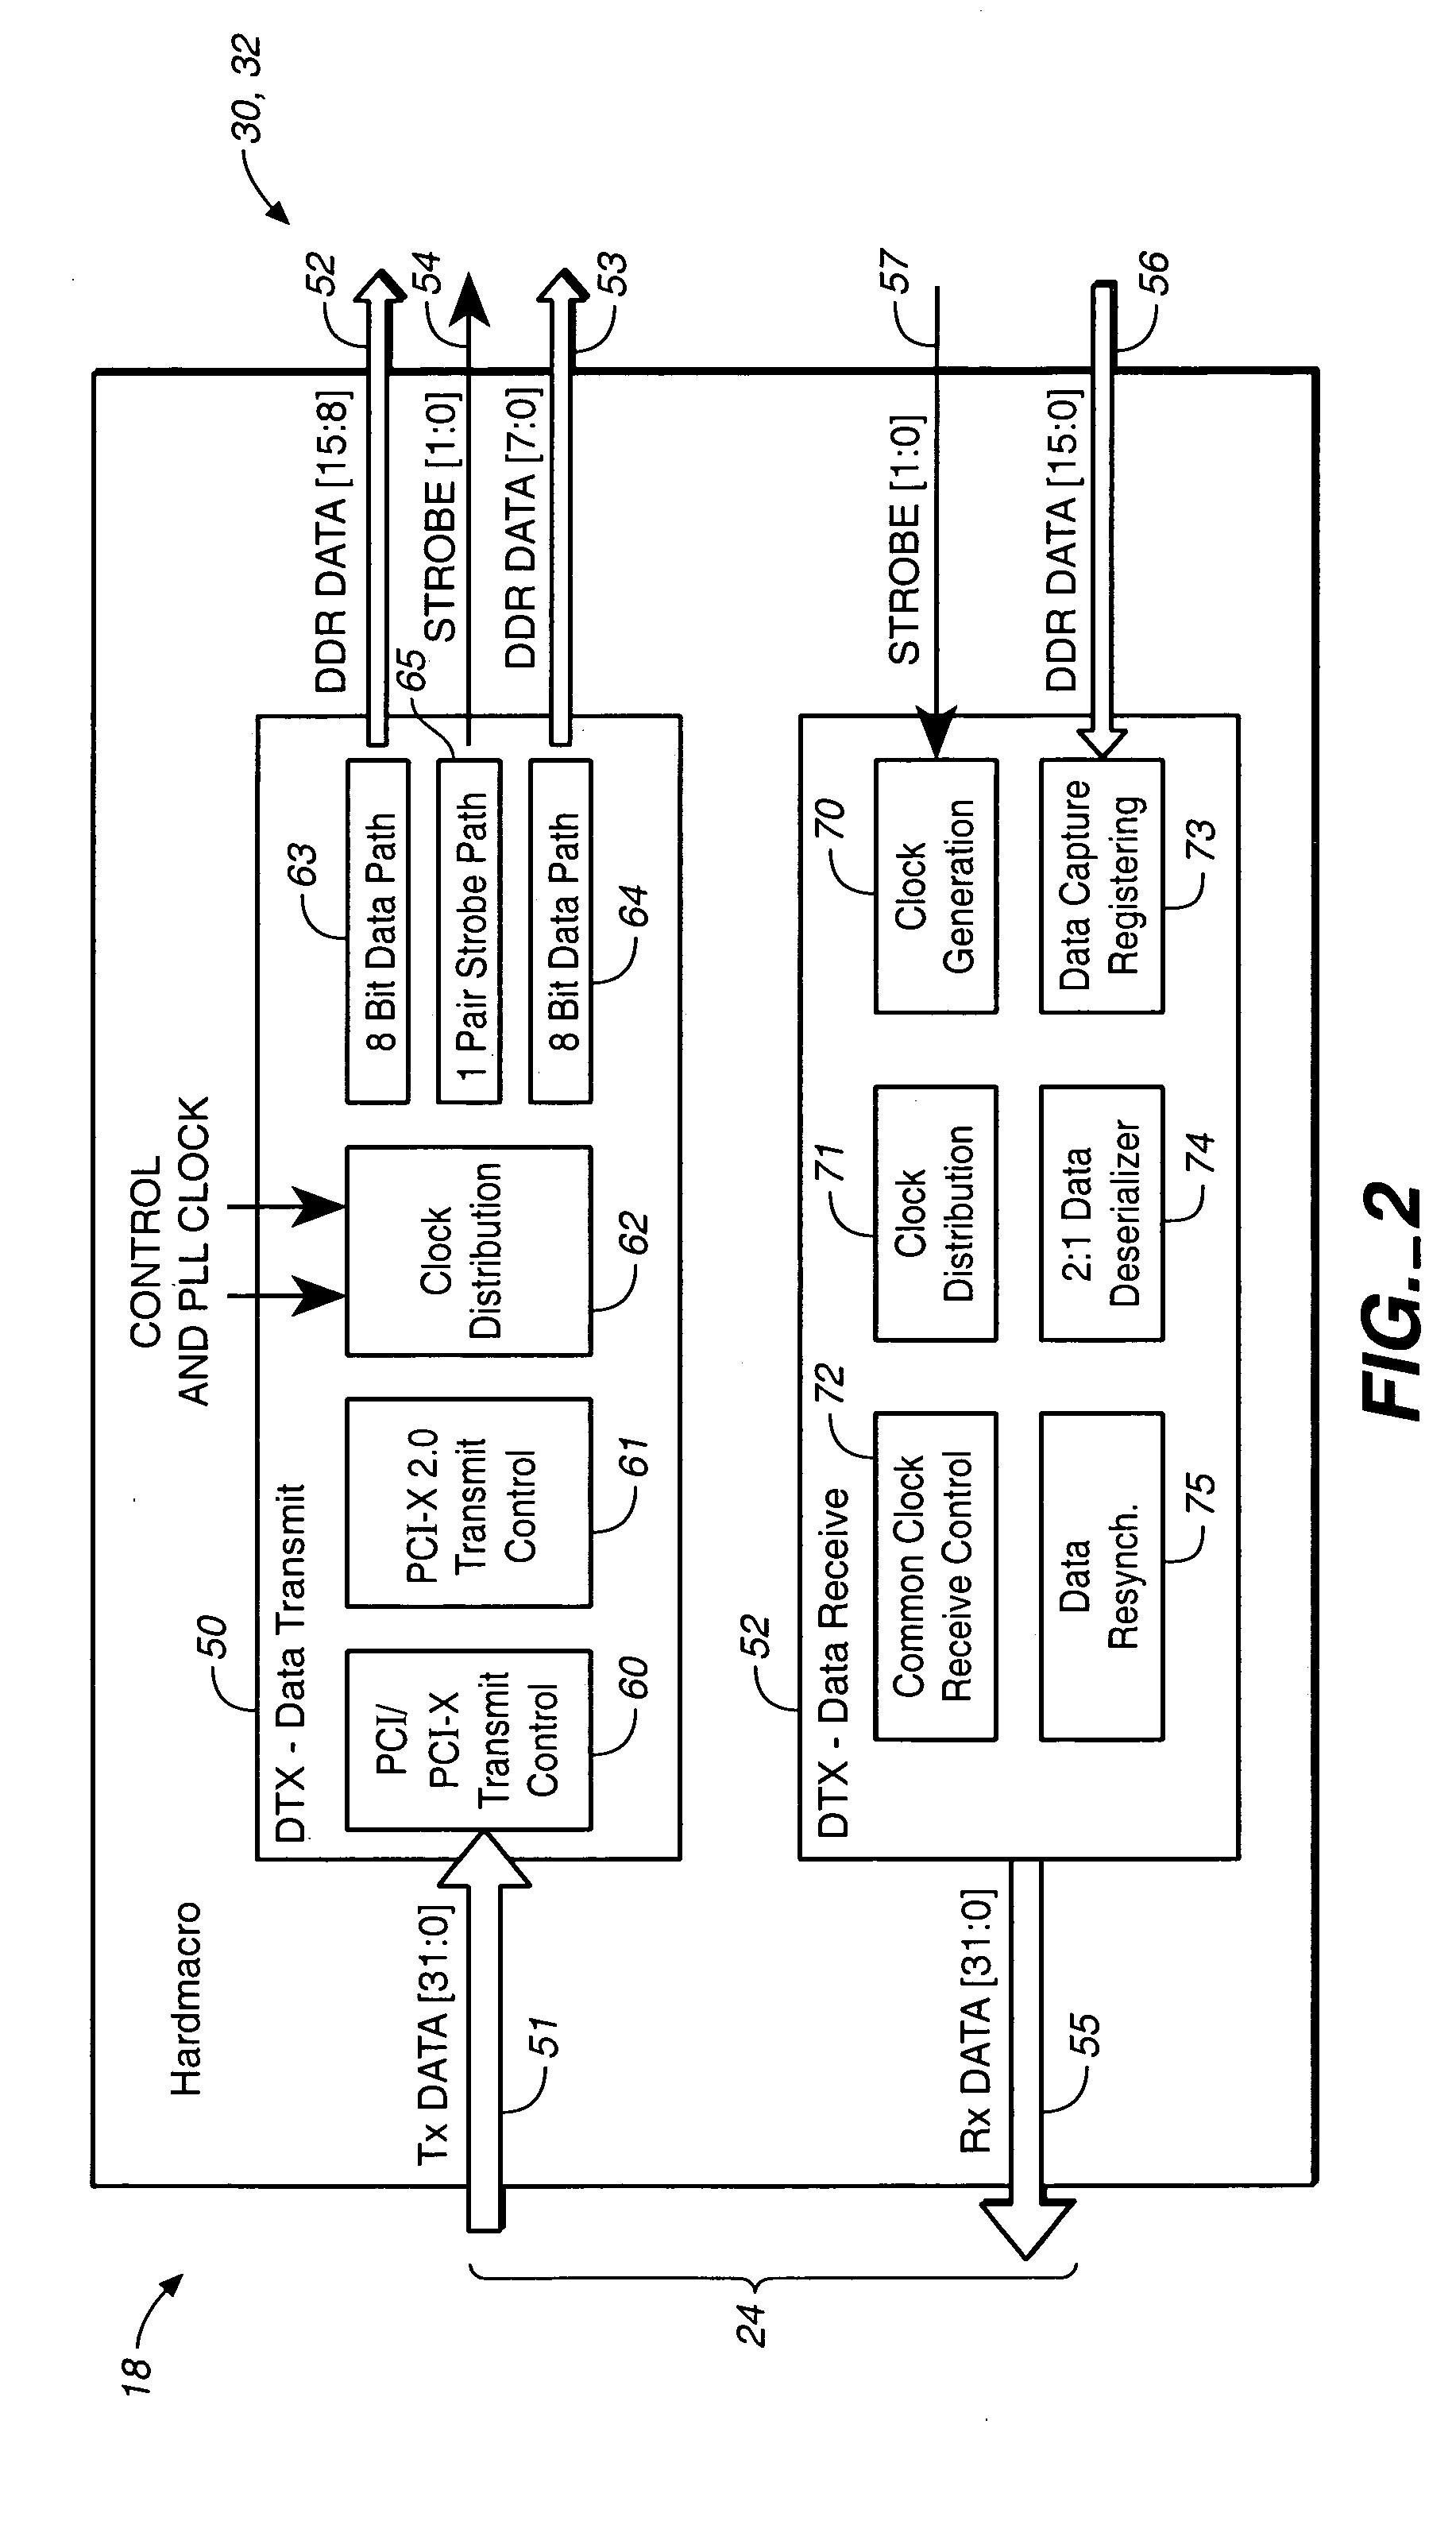 Macro cell for integrated circuit physical layer interface